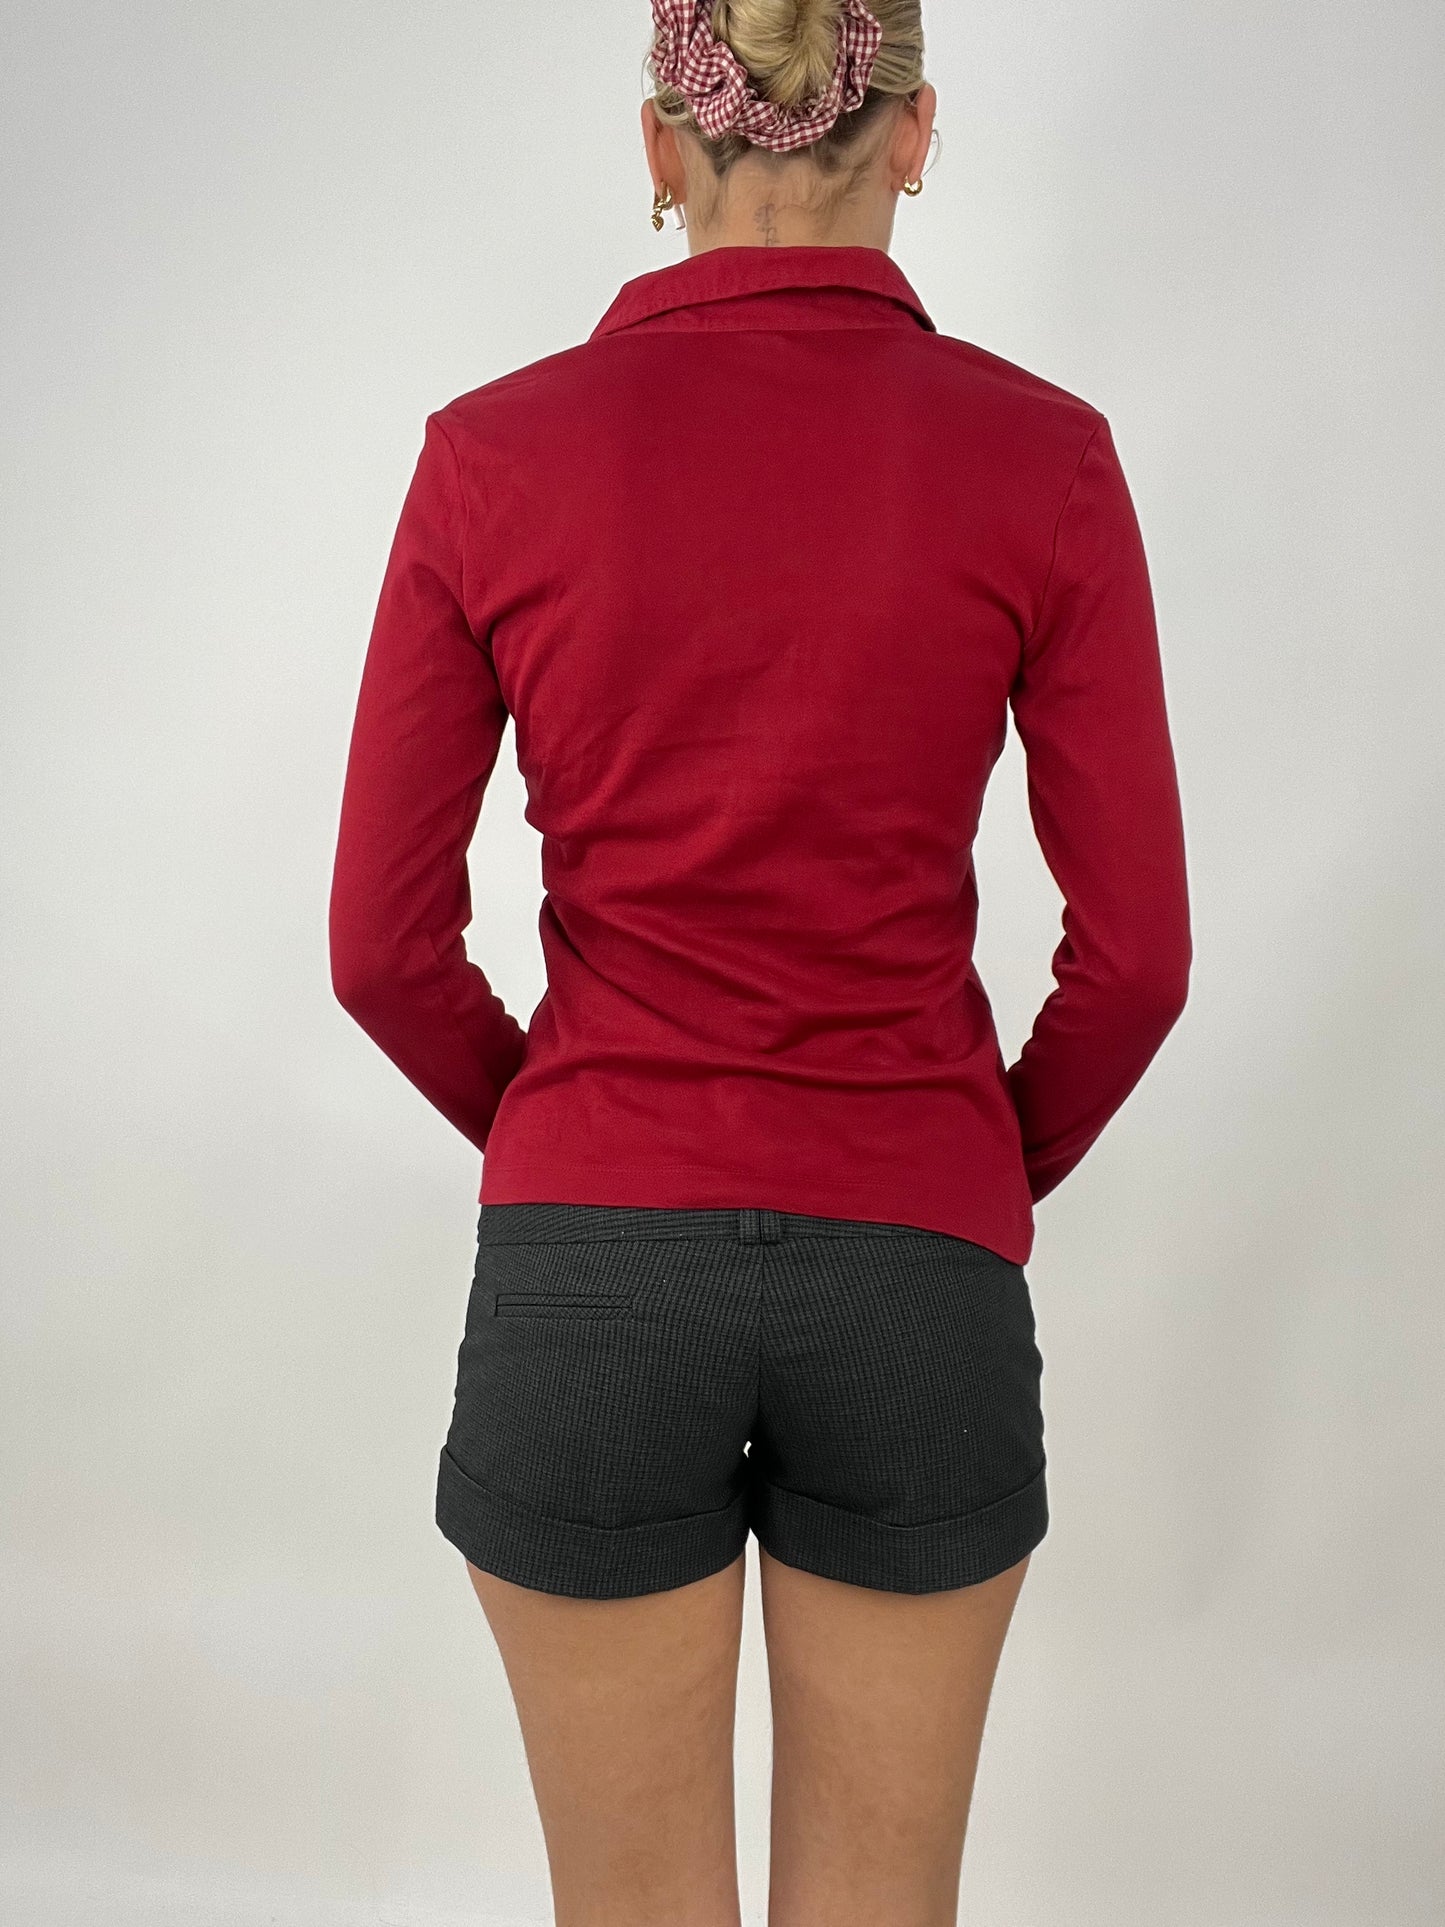 TAYLOR SWIFT DROP | medium red long sleeved collared top